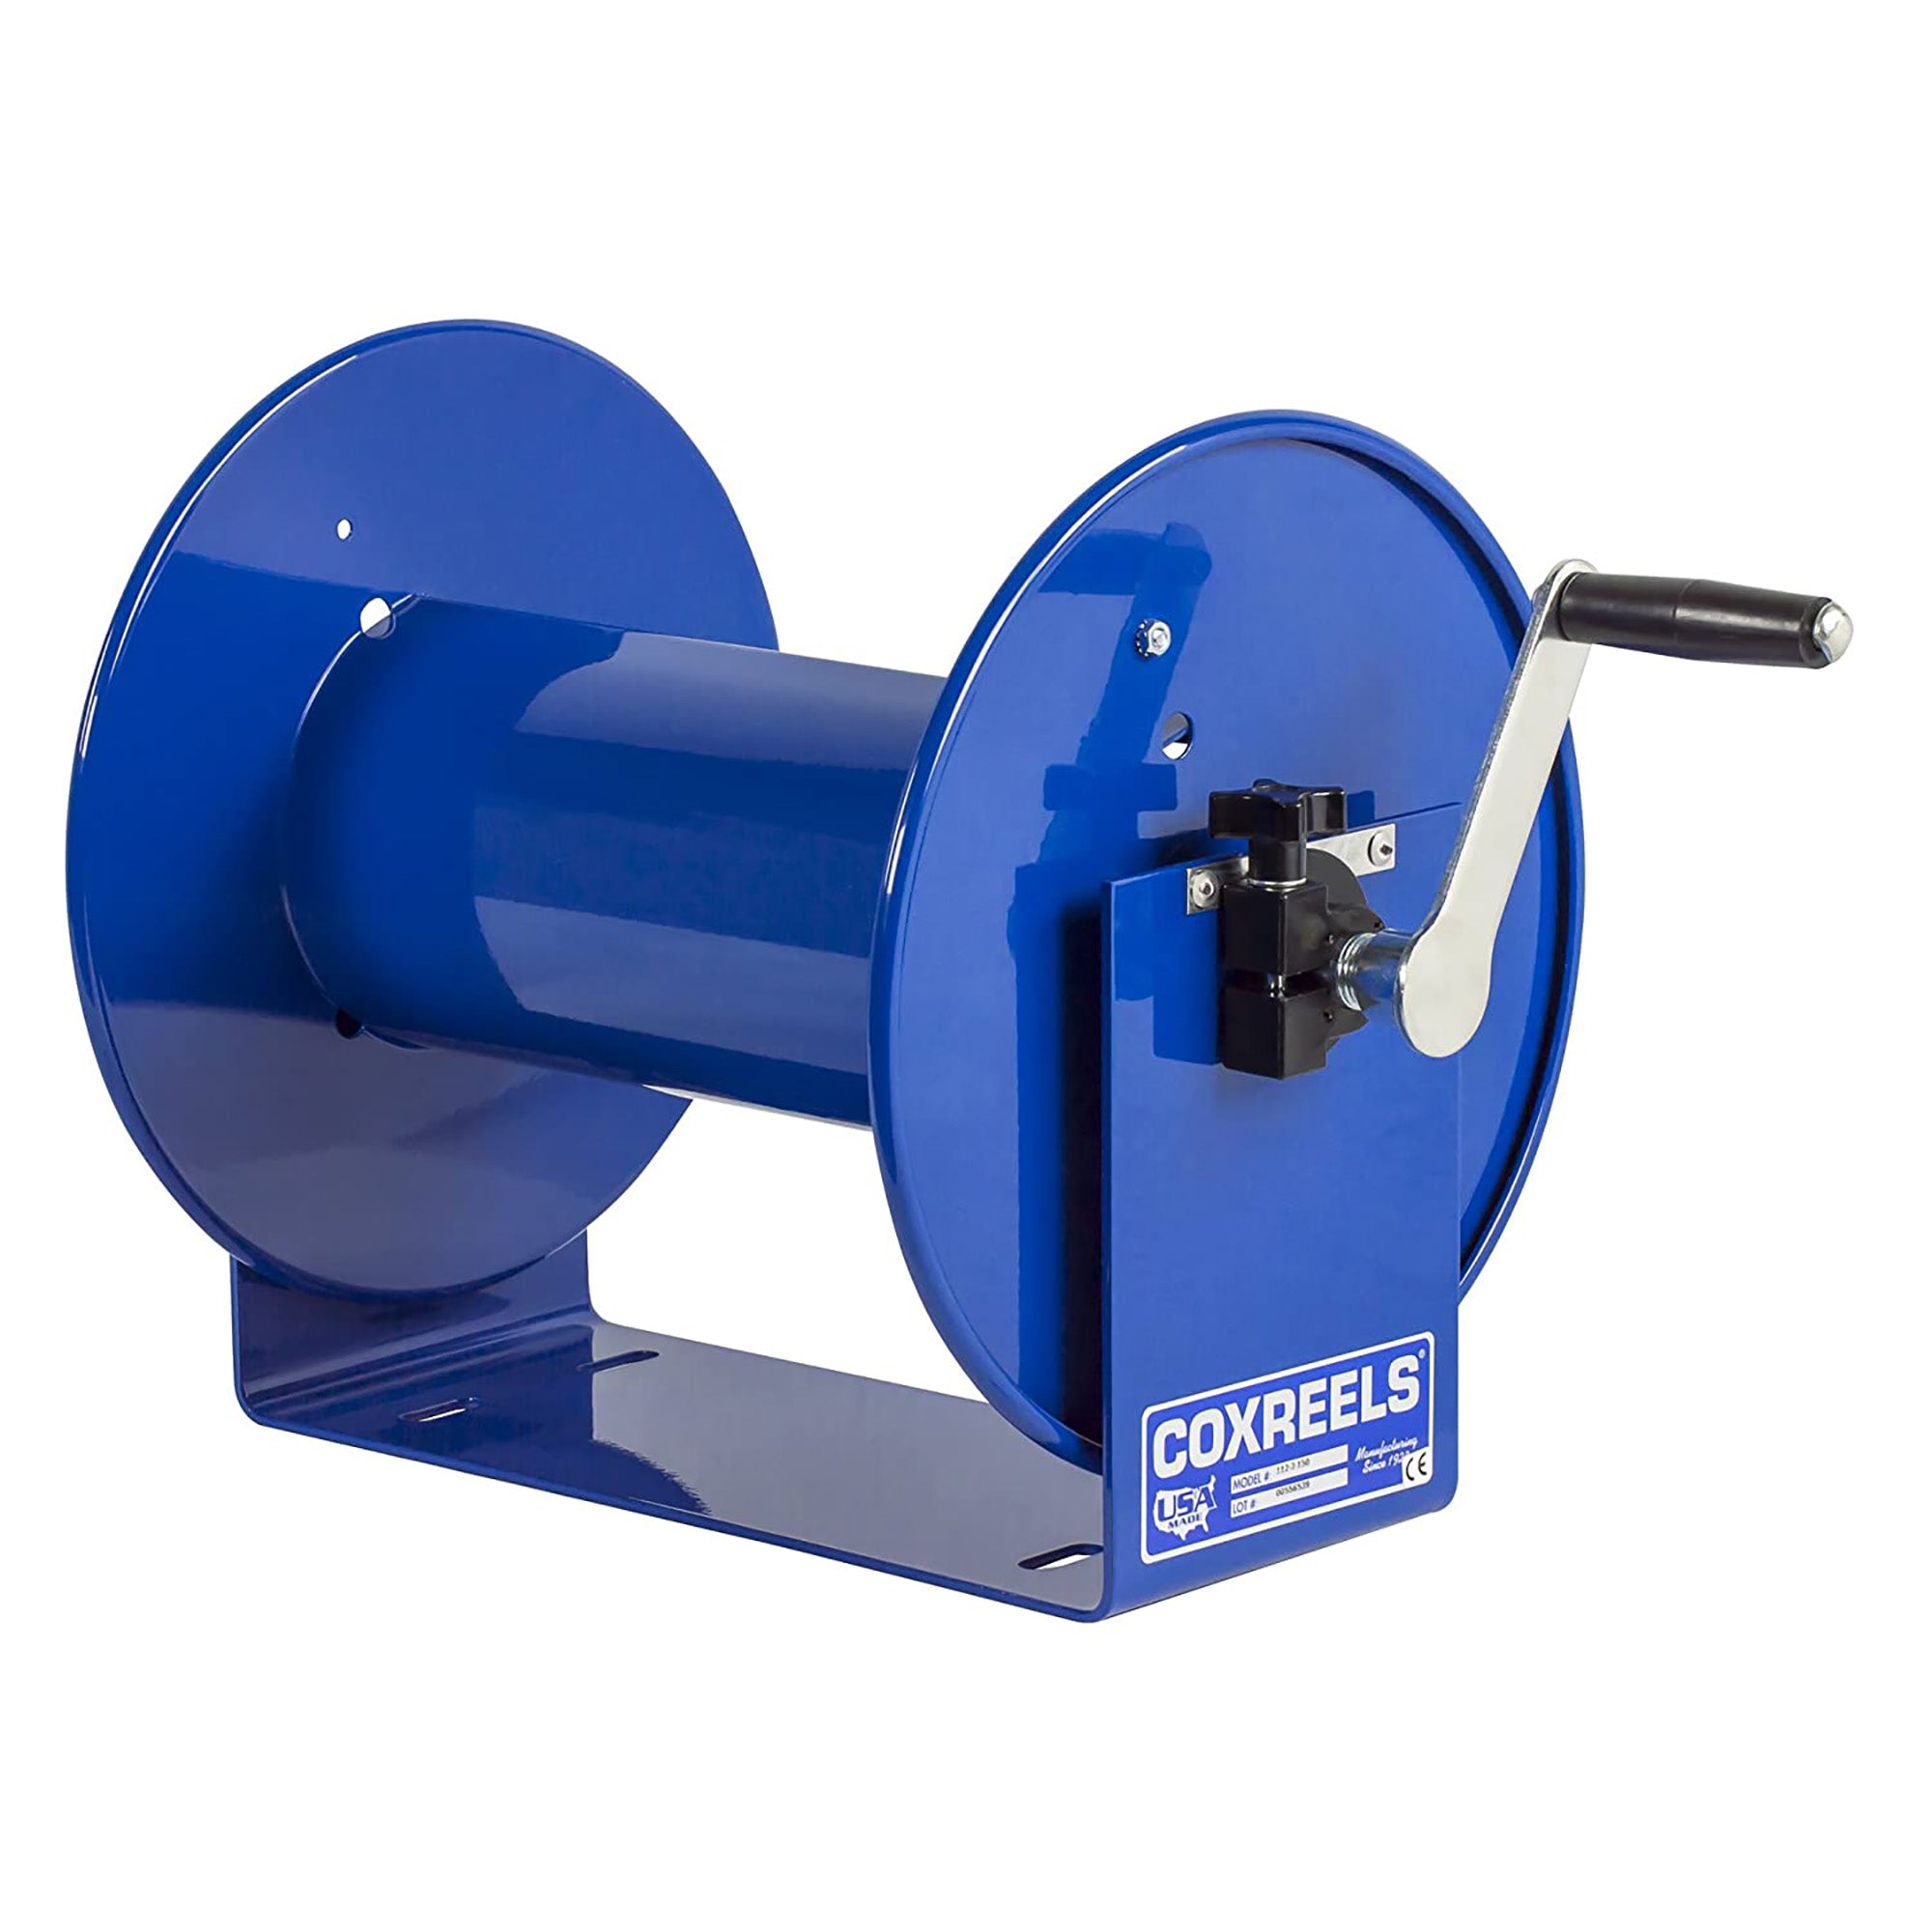 Mild Steel Fire Hose Reel Stand, Capacity: 1 ton at Rs 1500 in New